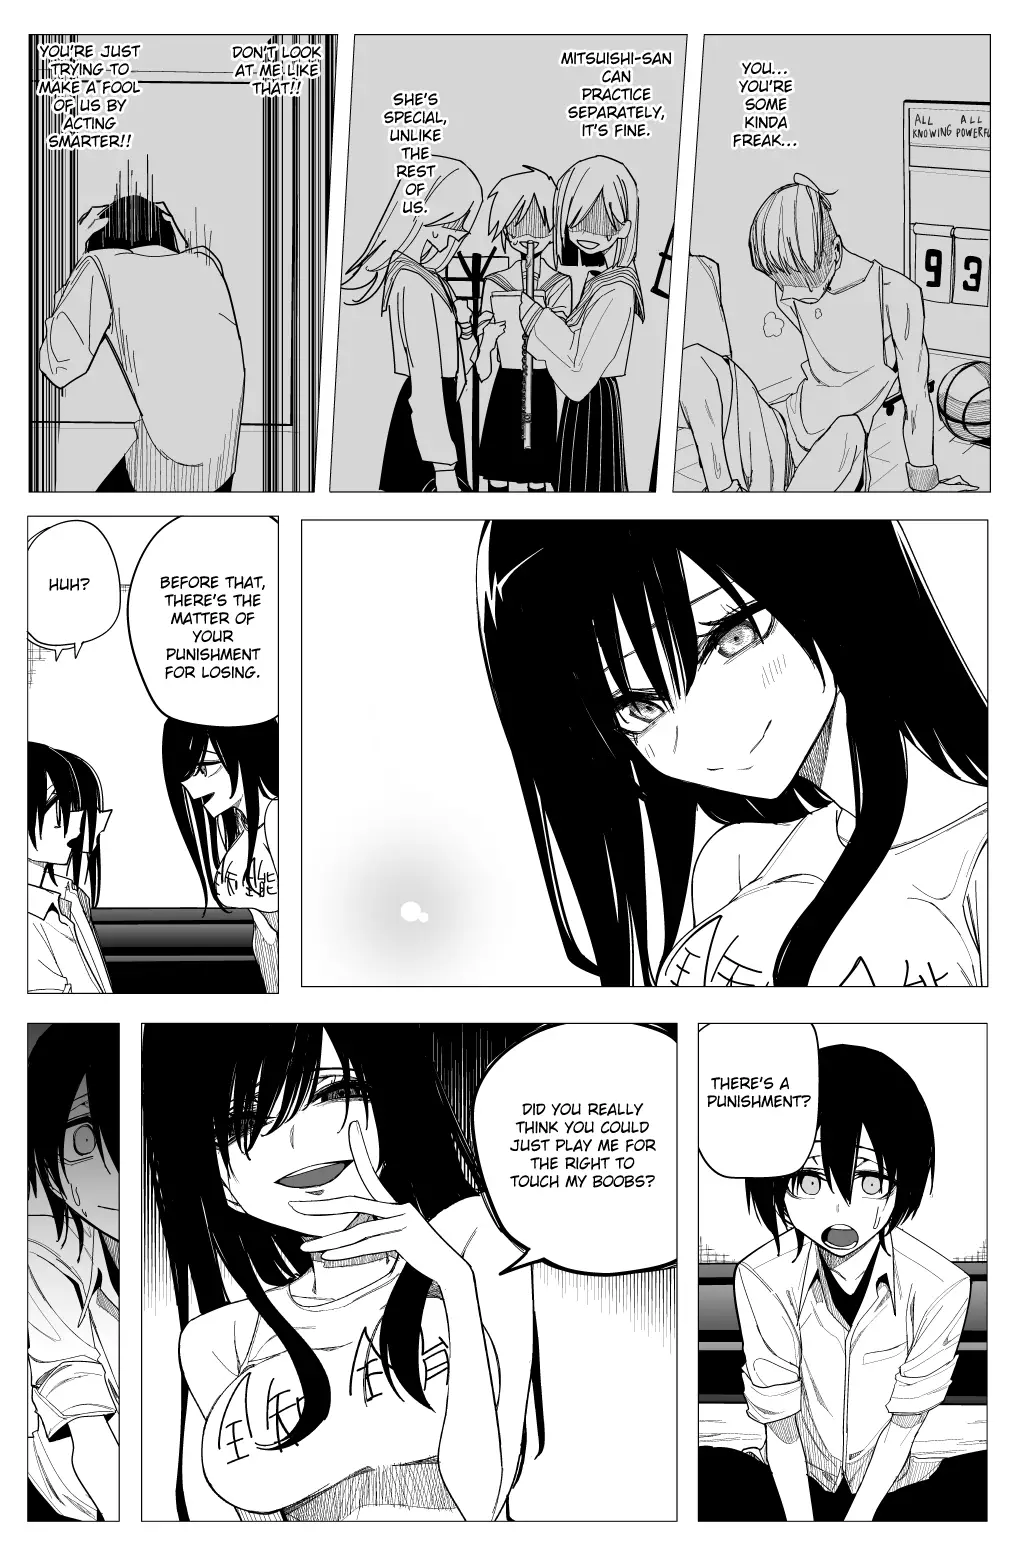 Mitsuishi-San Is Being Weird This Year - 27 page 15-c6de8271